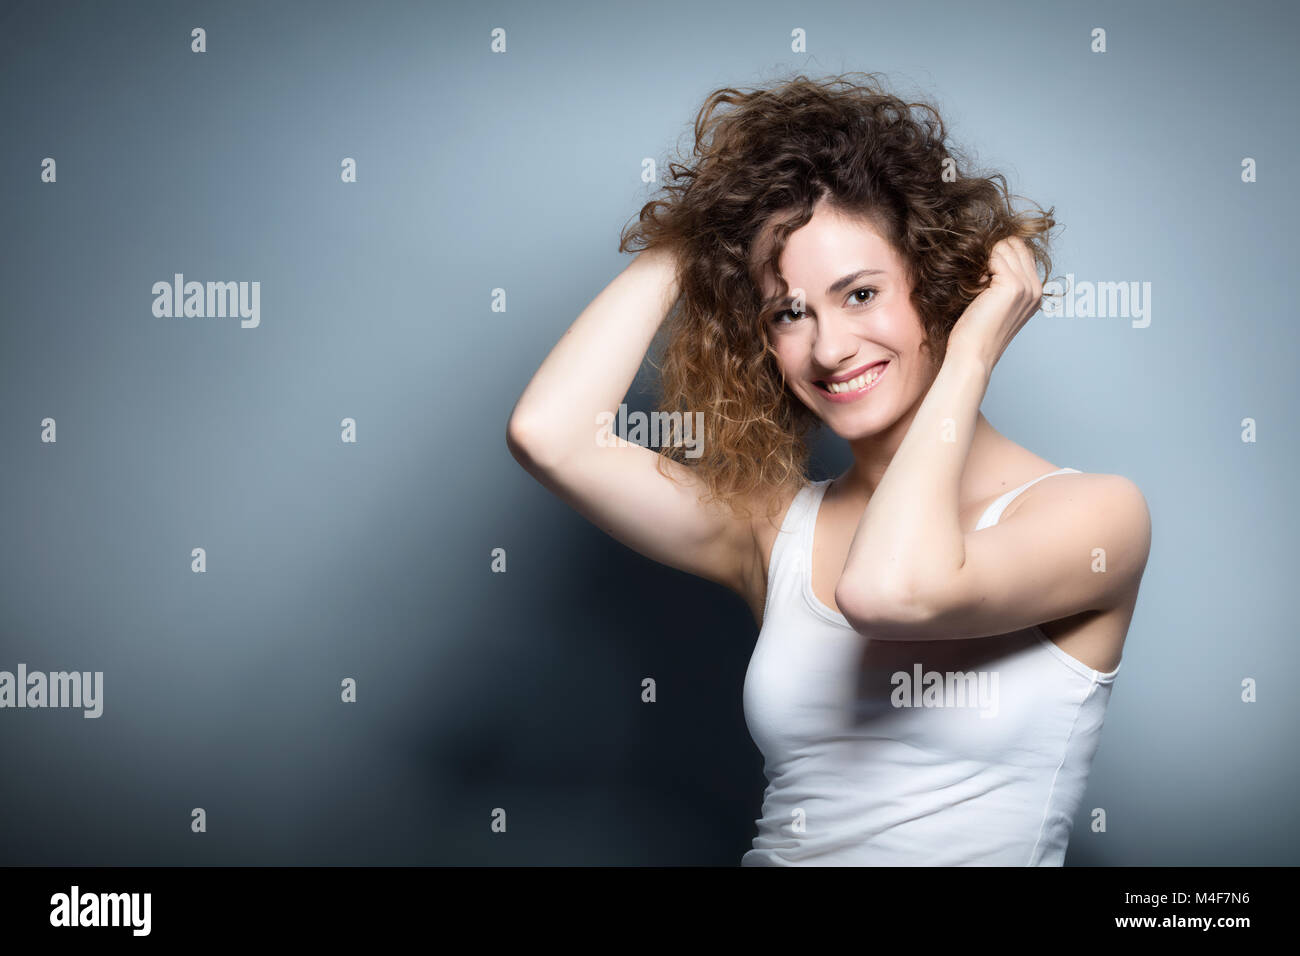 Young smiling woman holding her cheveux bouclés. Banque D'Images